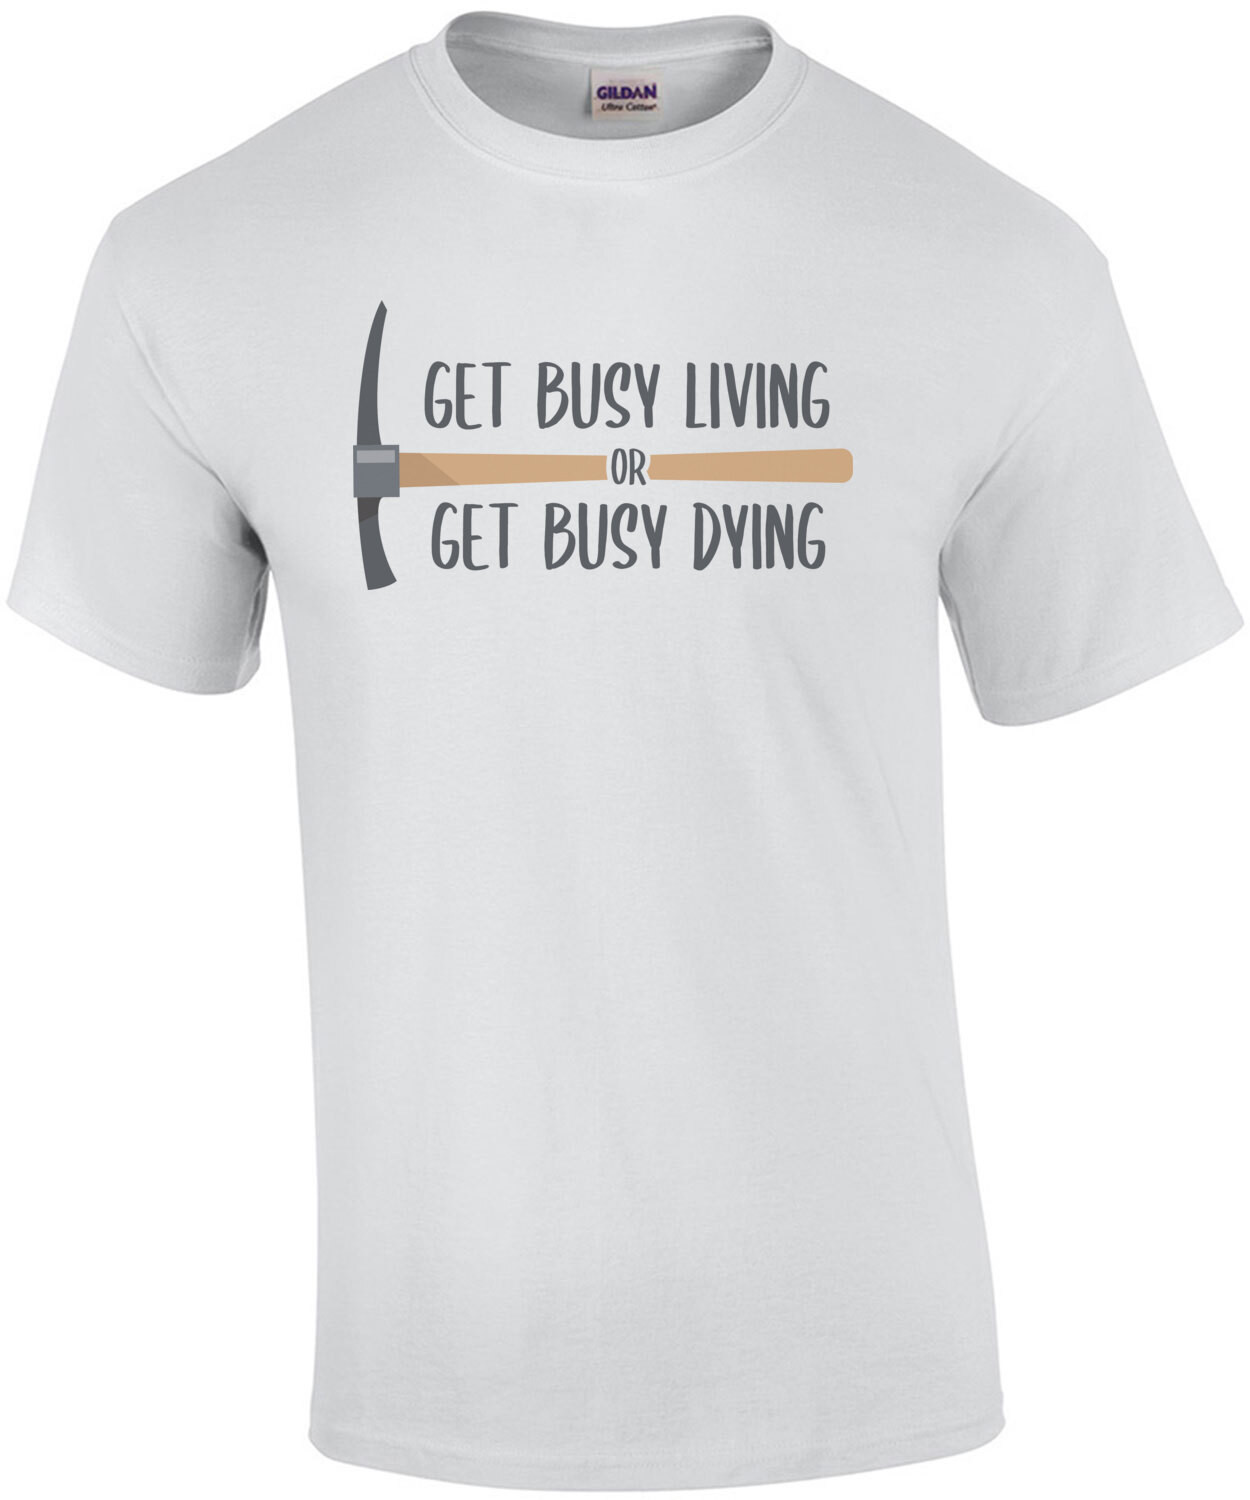 Get busy living or get busy dying - The Shawshank Redemption - 90's T-Shirt